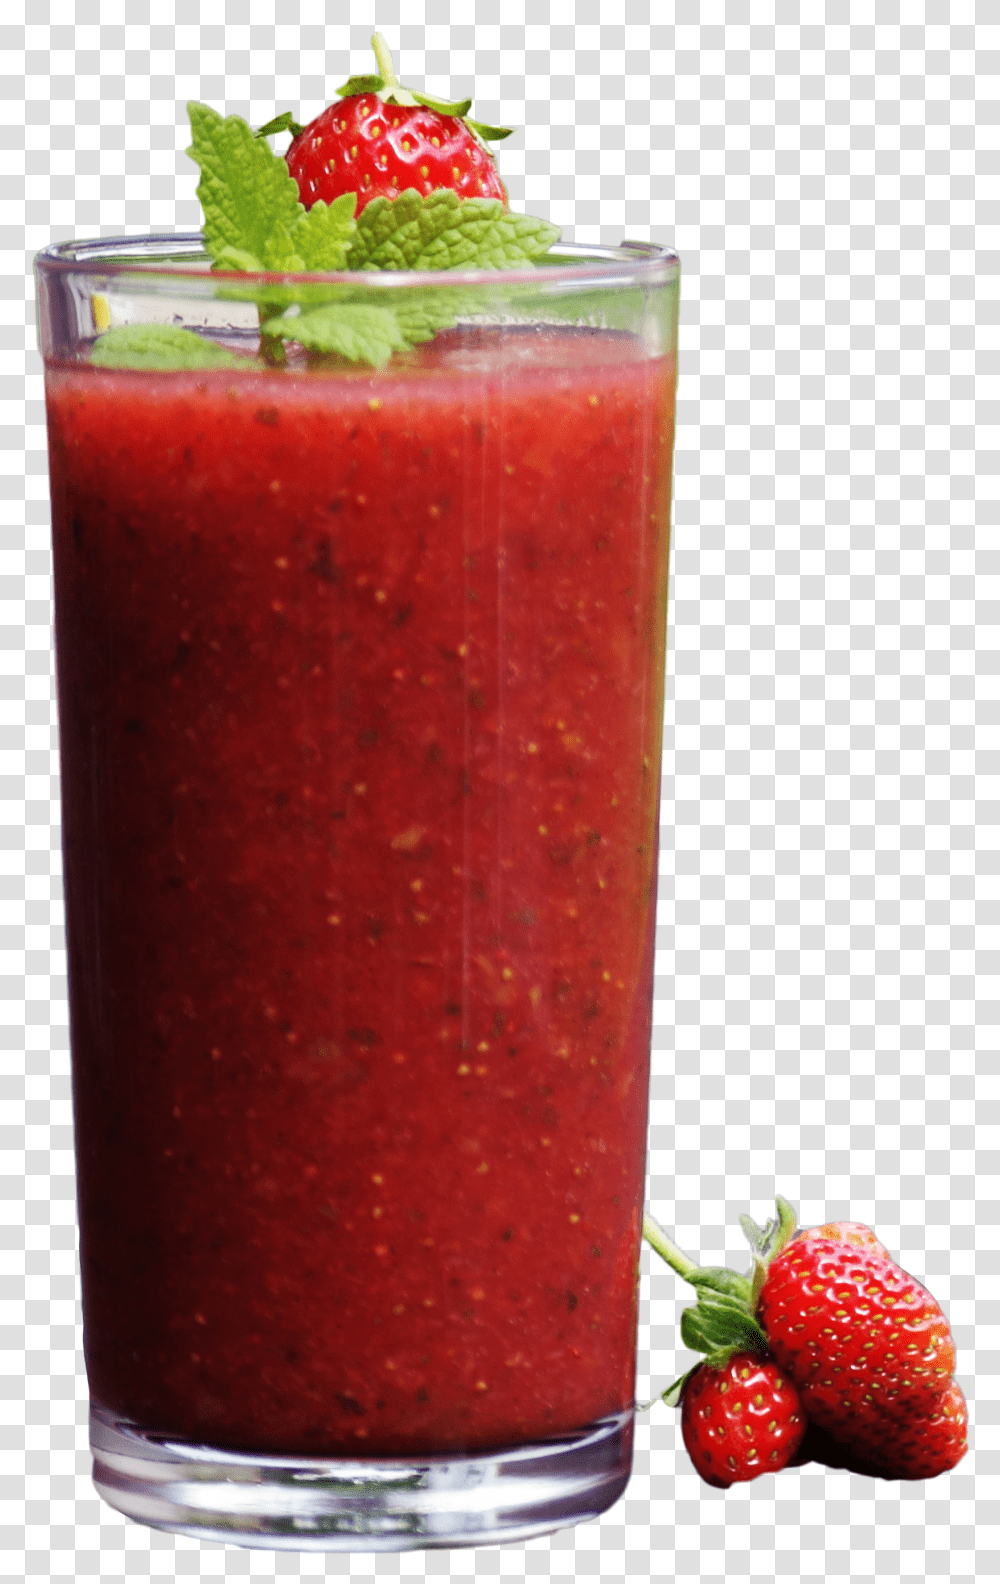 Smoothie Fruit Strawberry Image For Background Smoothie Clipart, Juice, Beverage, Plant, Potted Plant Transparent Png